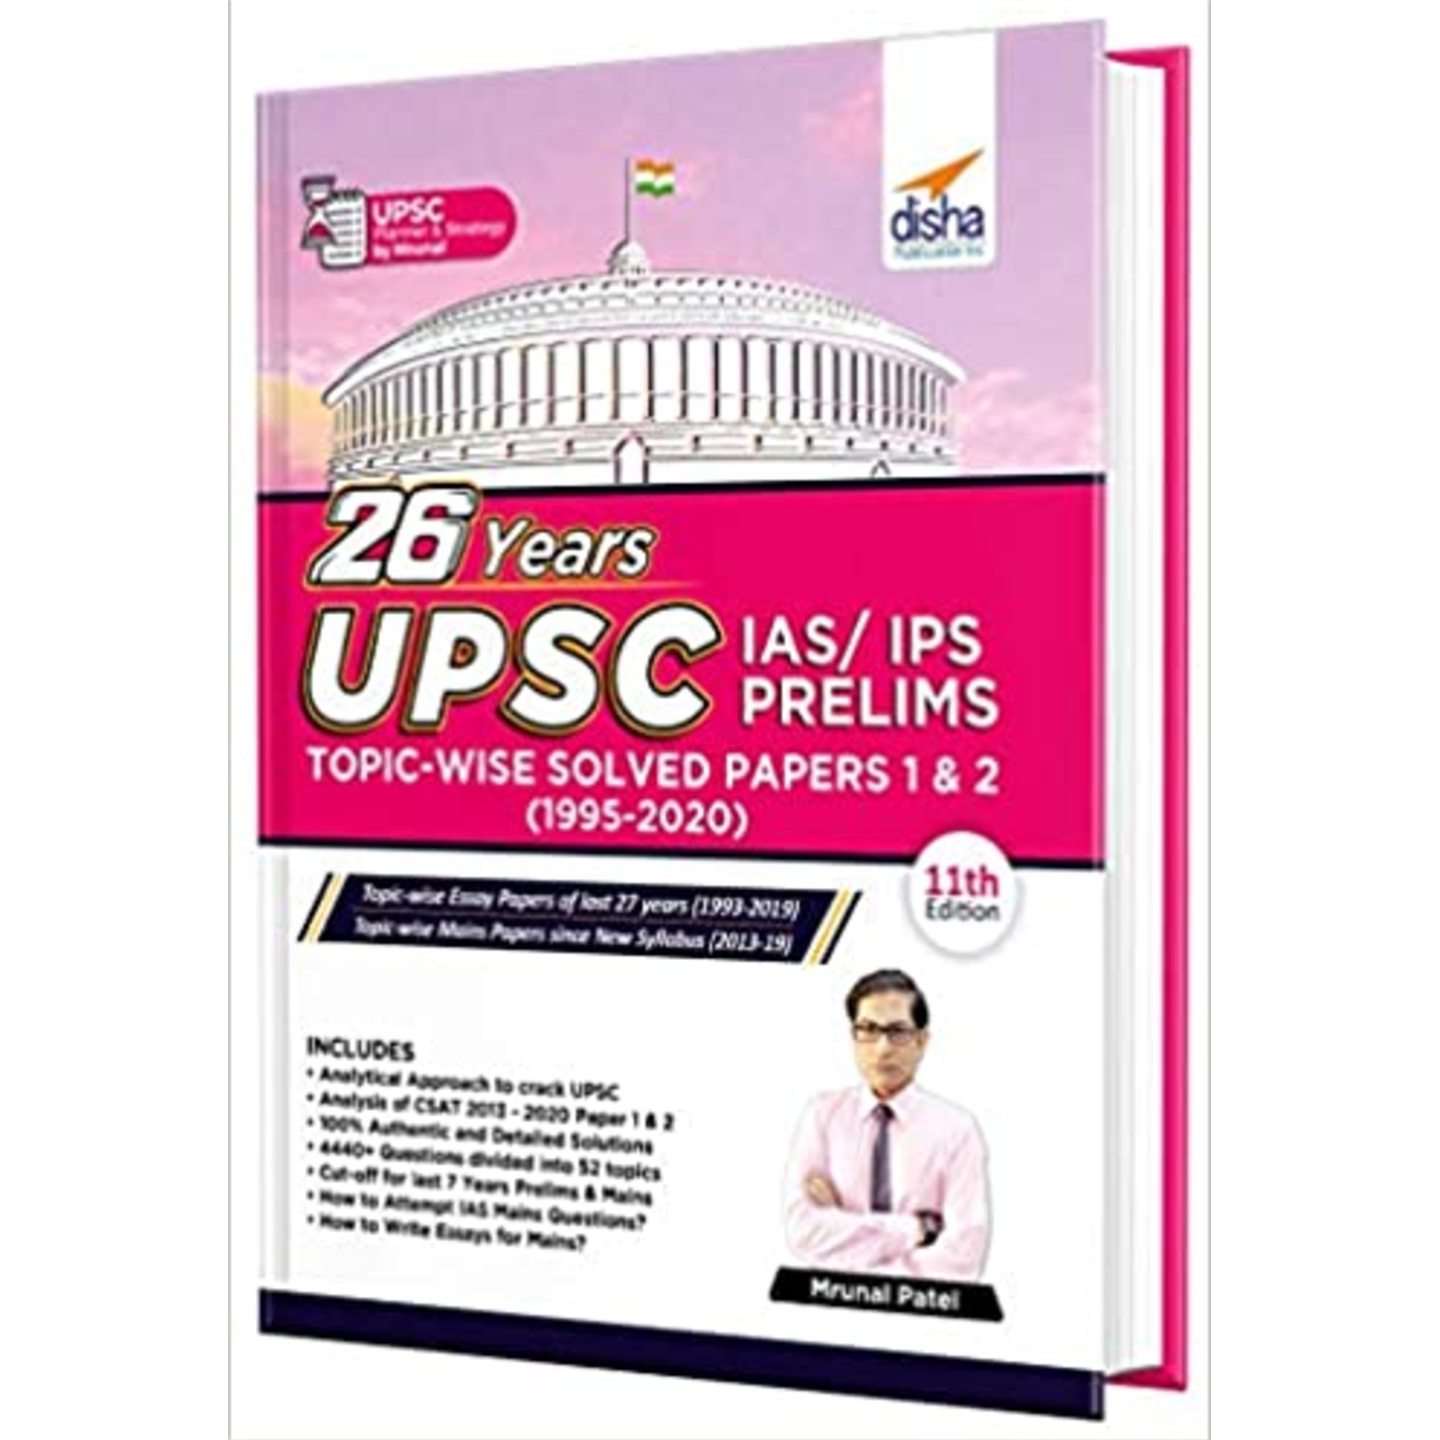 DISHA 26 Years UPSC IAS IPS Prelims Topic-wise Solved Papers 1 & 2 MRUNAL PATEL